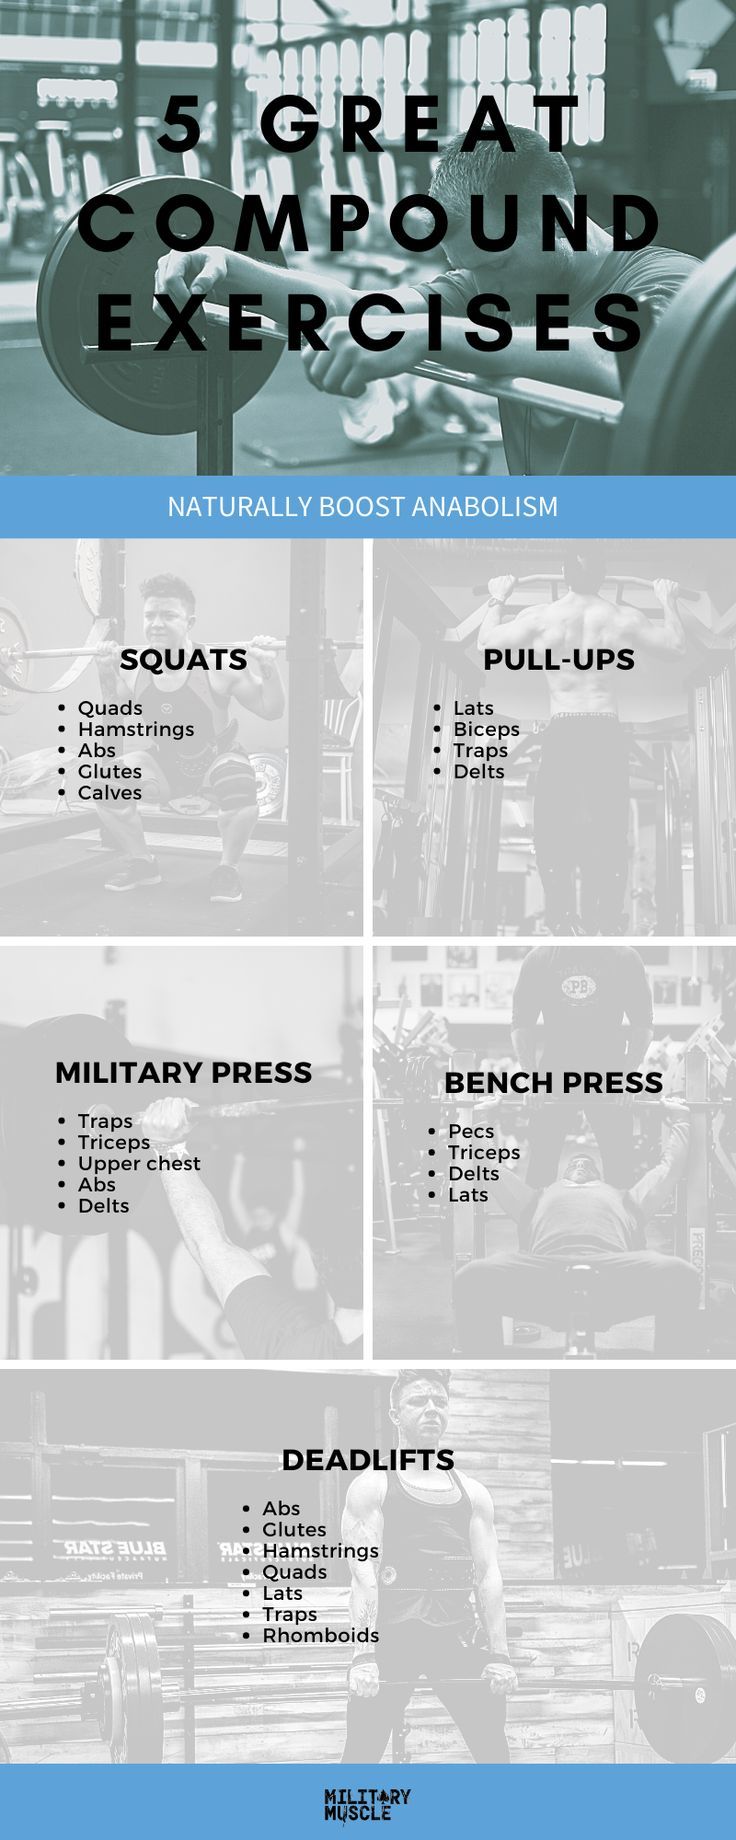 Five great compound exercises.